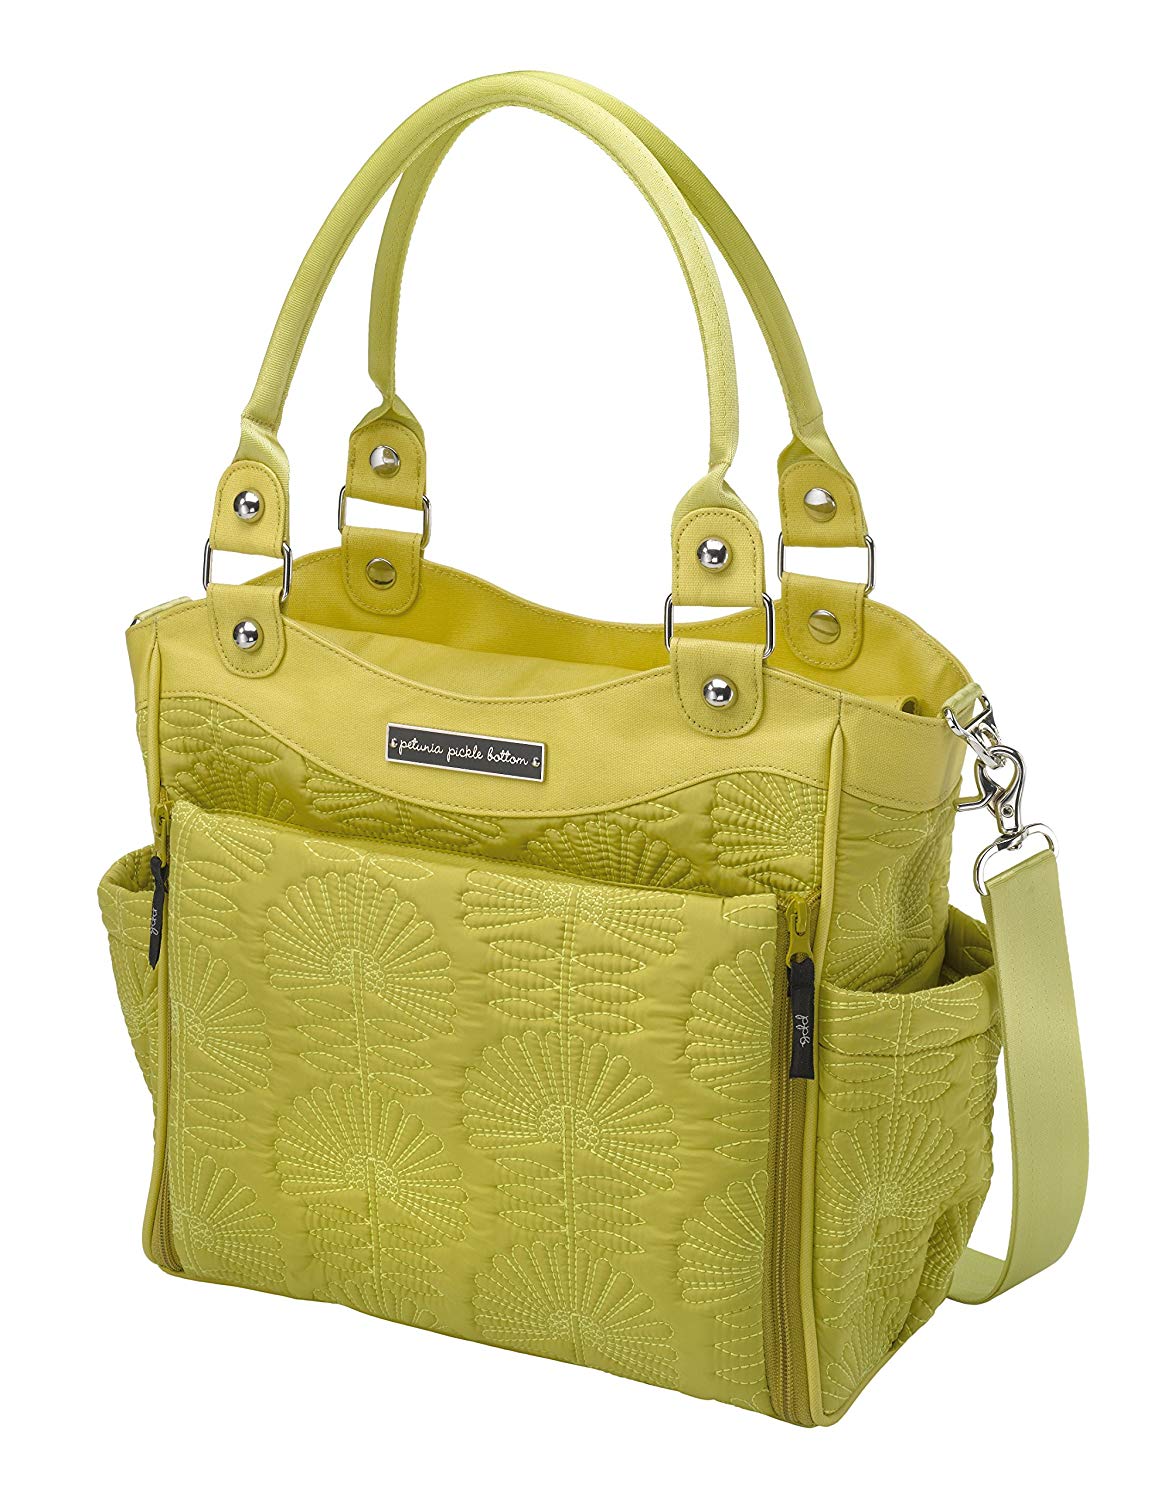 Petunia Pickle Bottom City Carry all Handbag with Changing Station